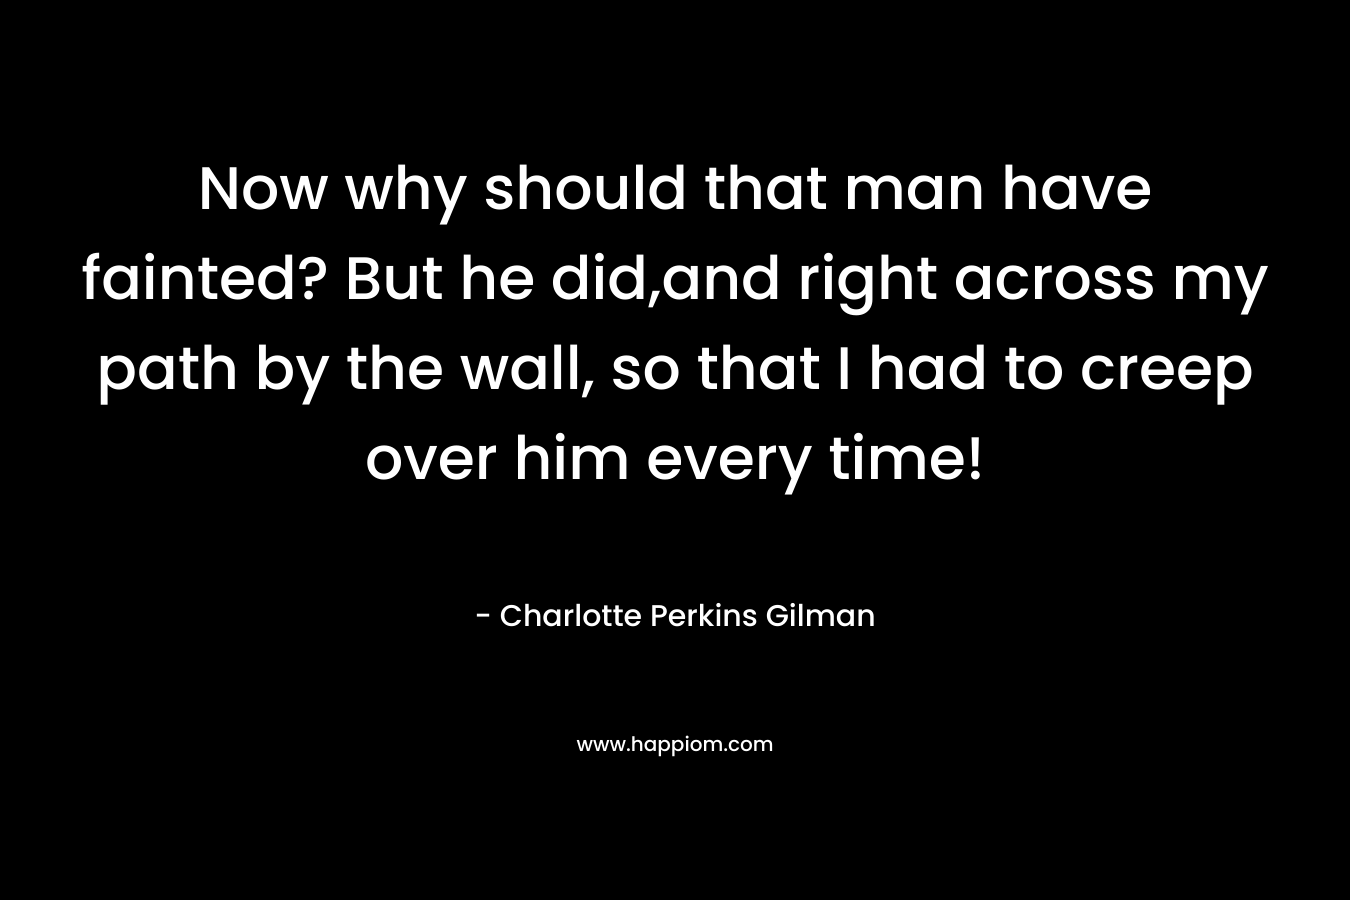 Now why should that man have fainted? But he did,and right across my path by the wall, so that I had to creep over him every time! – Charlotte Perkins Gilman